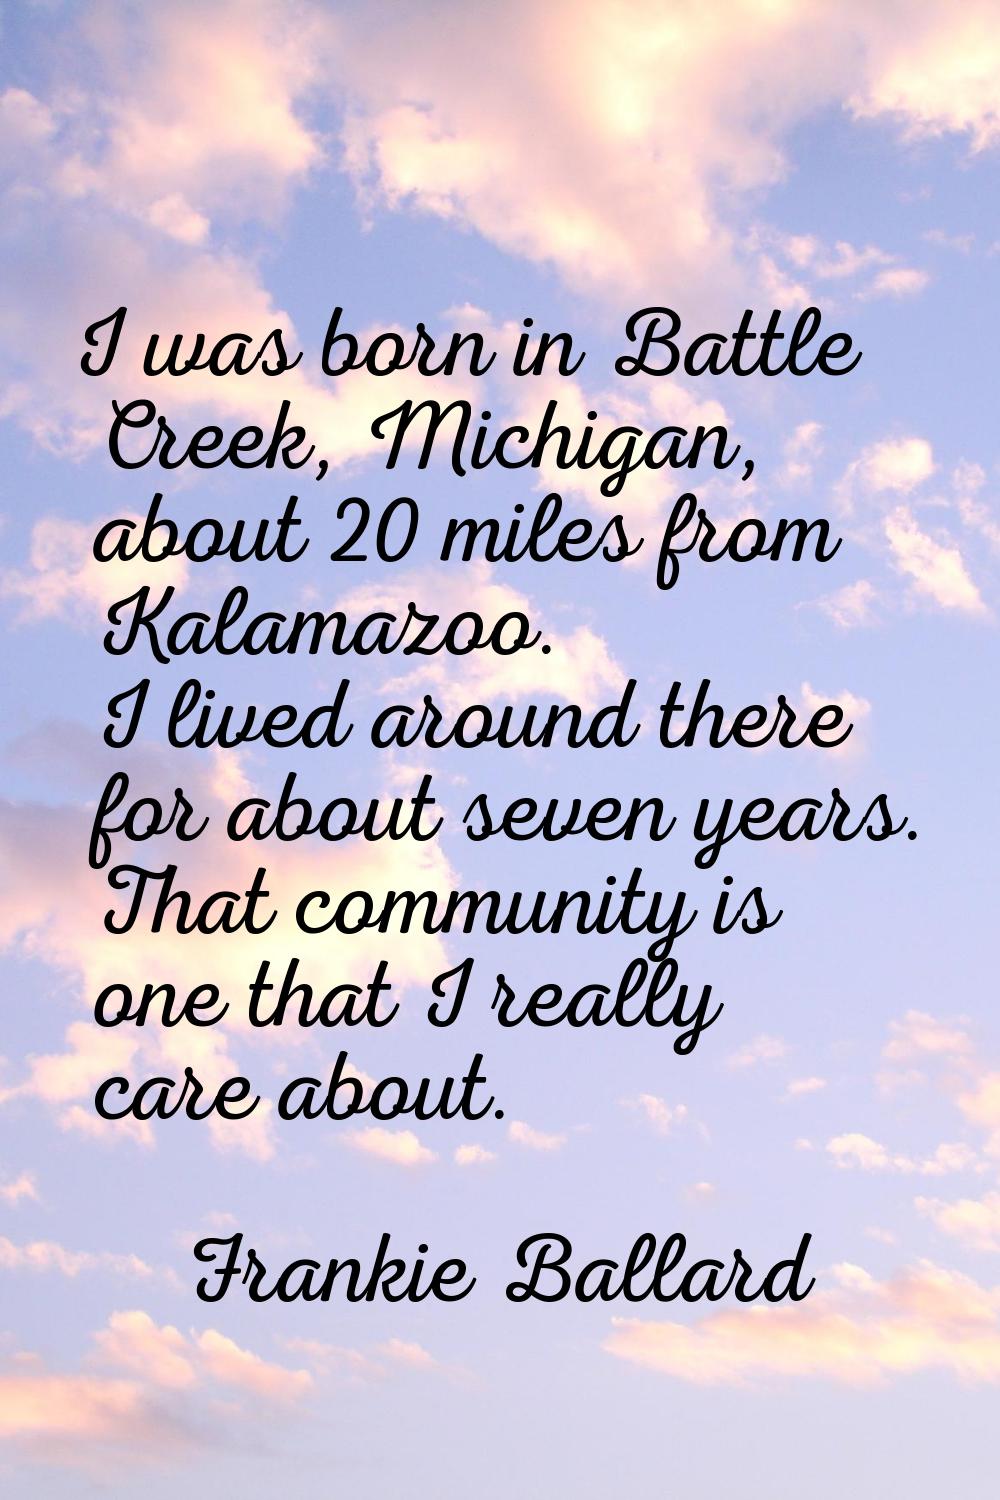 I was born in Battle Creek, Michigan, about 20 miles from Kalamazoo. I lived around there for about